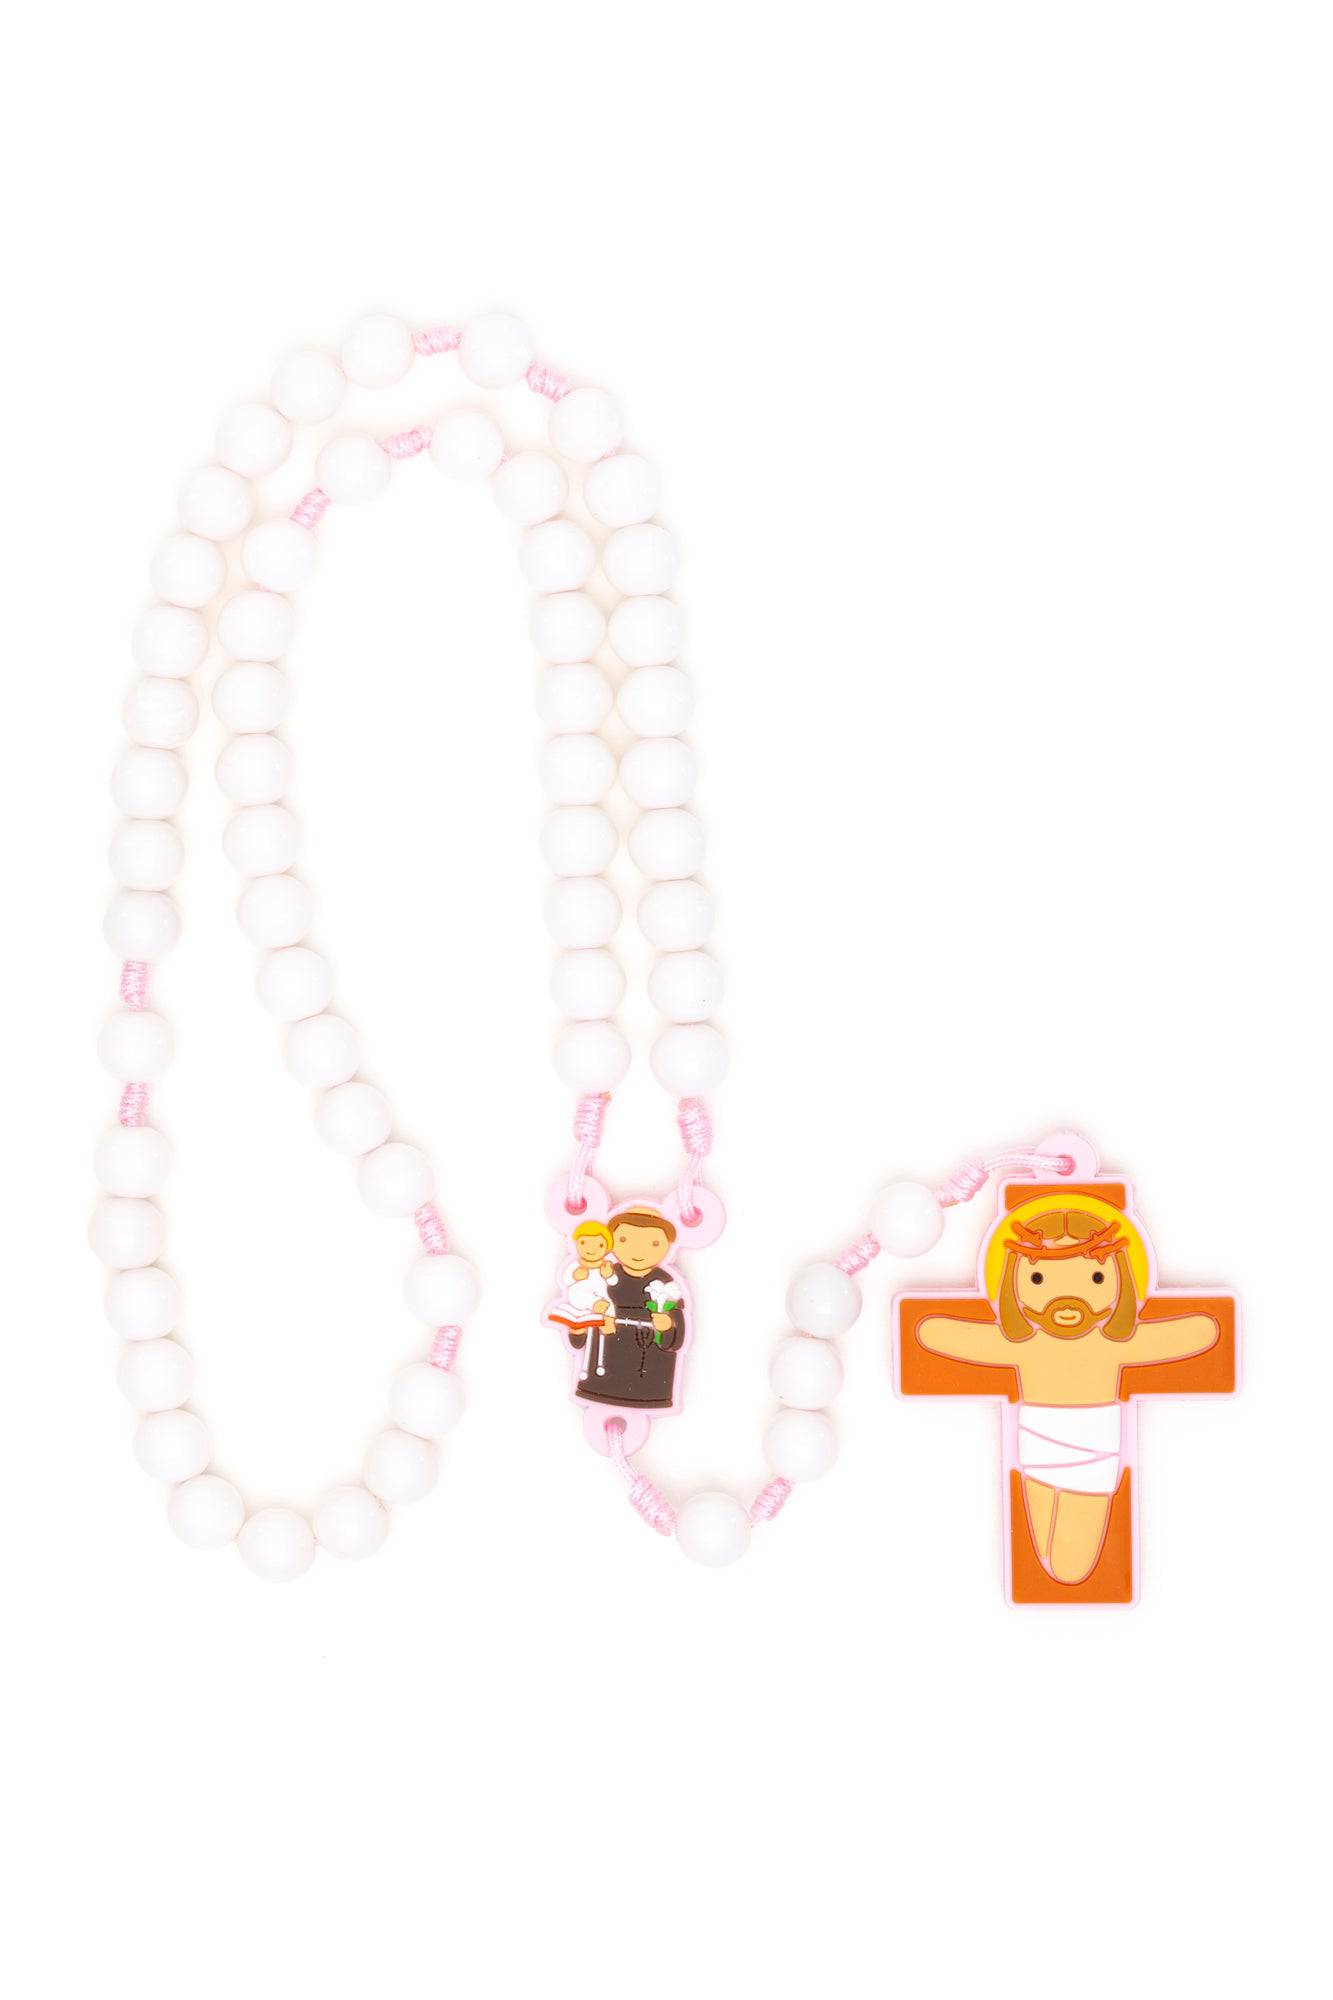 Saint Anthony Pink Rosary - Little Drops of Water